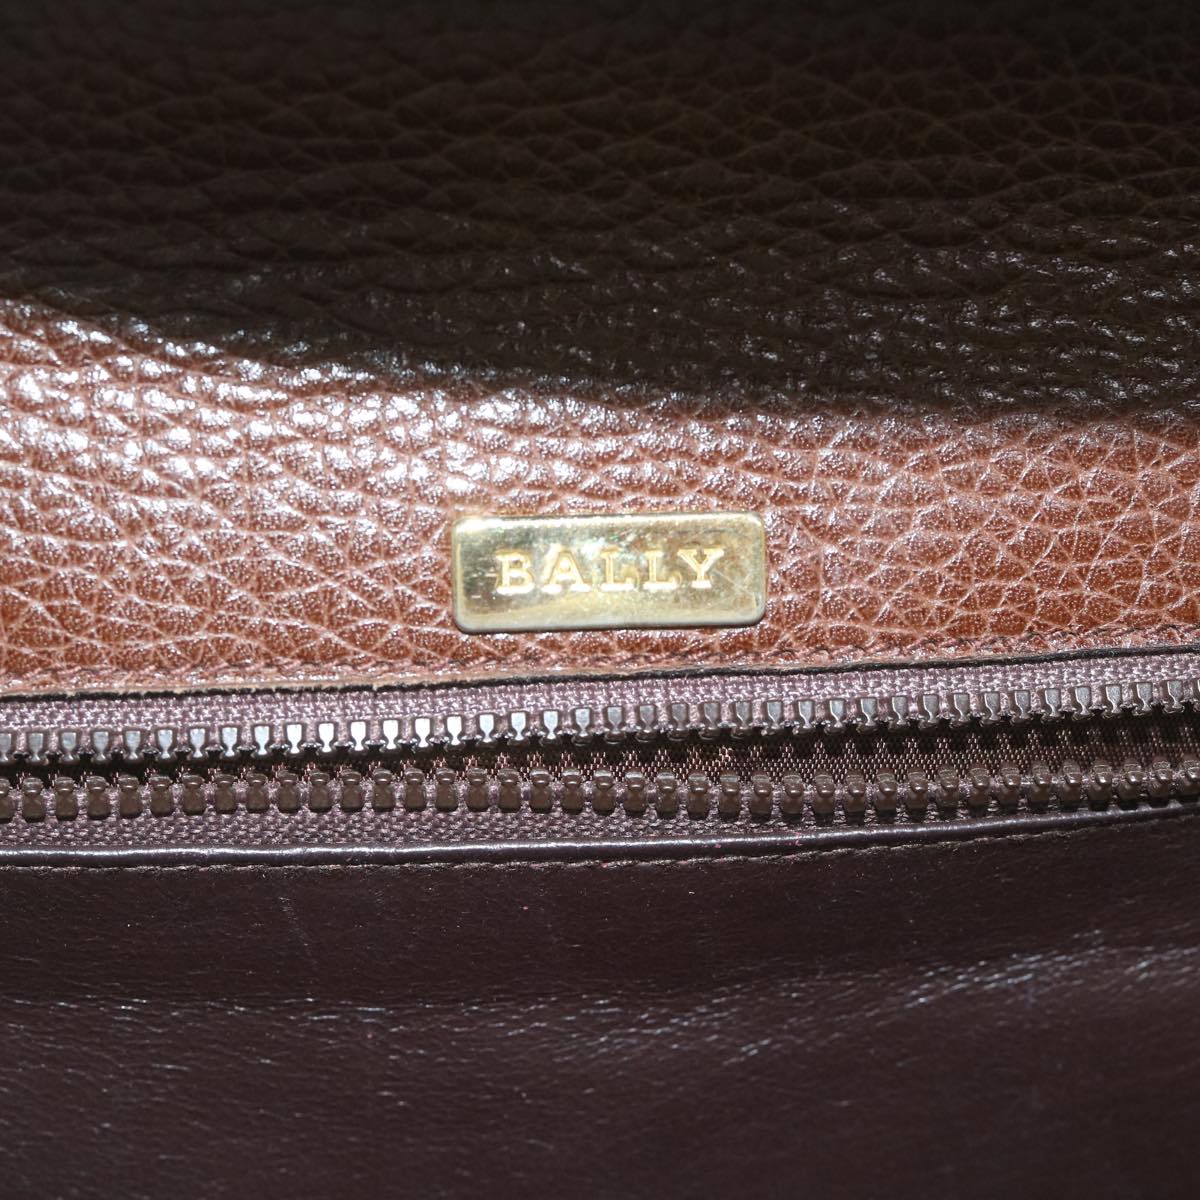 BALLY Hand Bag 2way Brown Auth bs10358